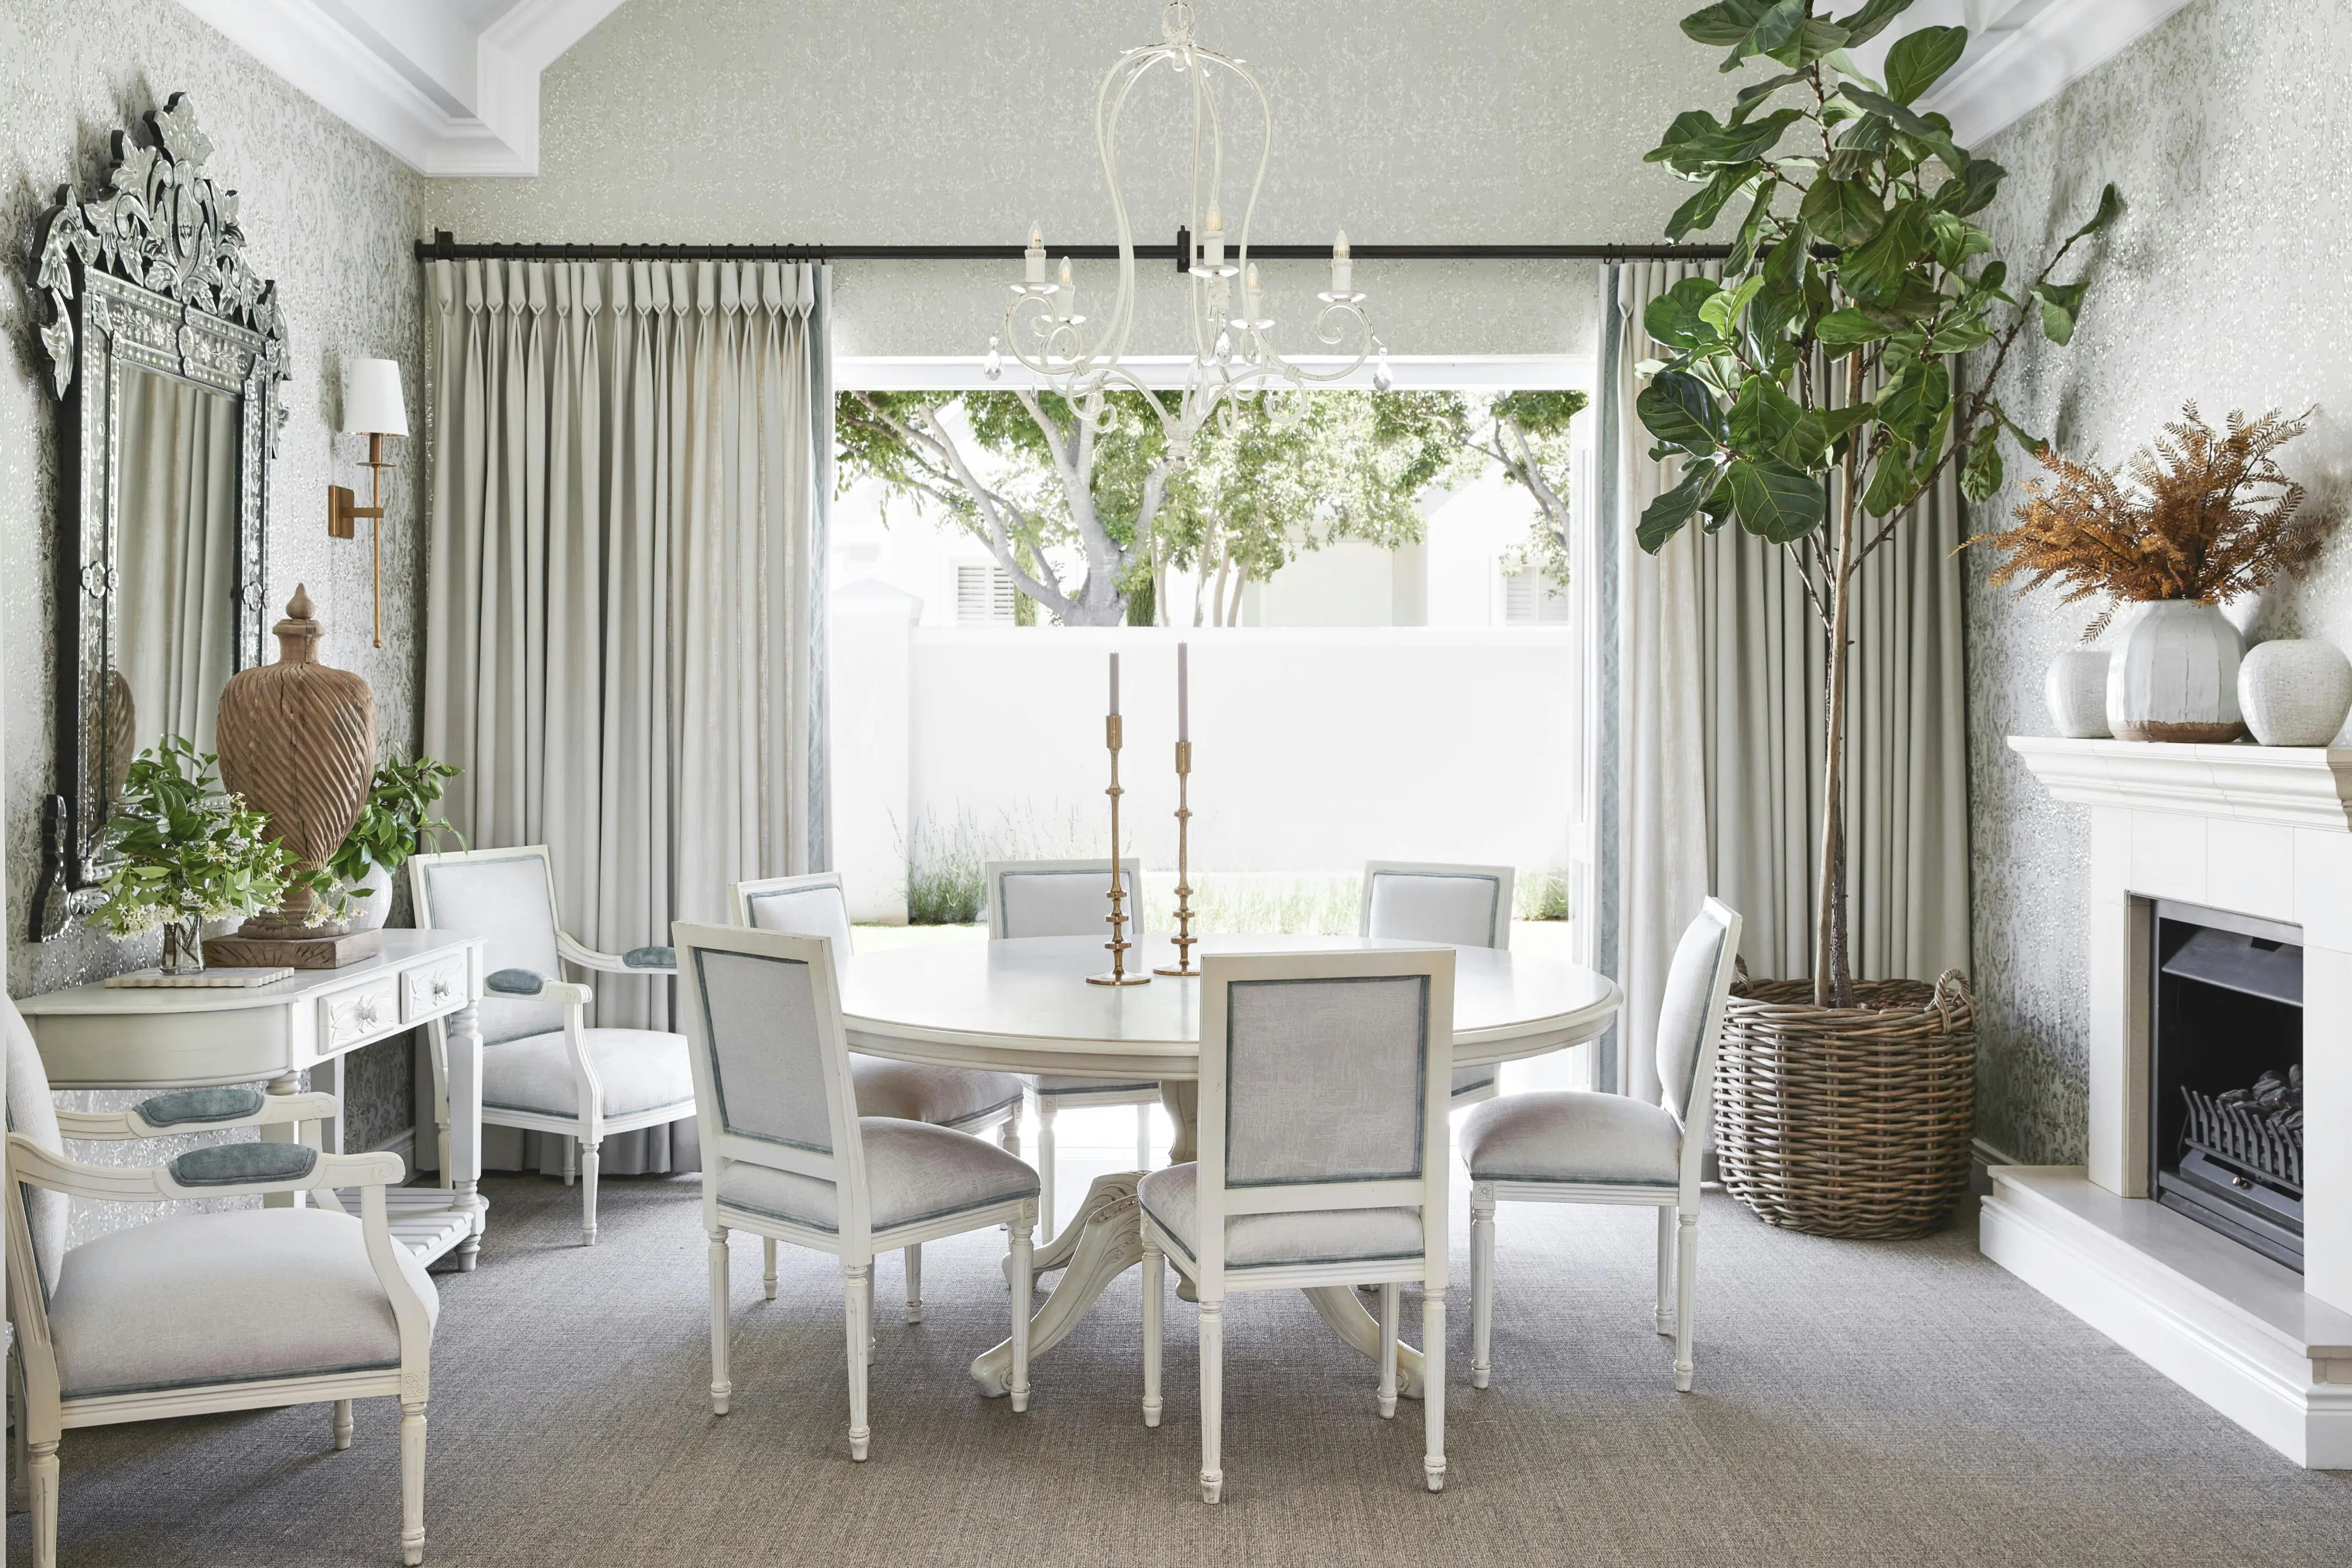 Centred is a circular dining table with white dining chairs, a fireplace sits to the right of the image with a console table below a mirror to the left.